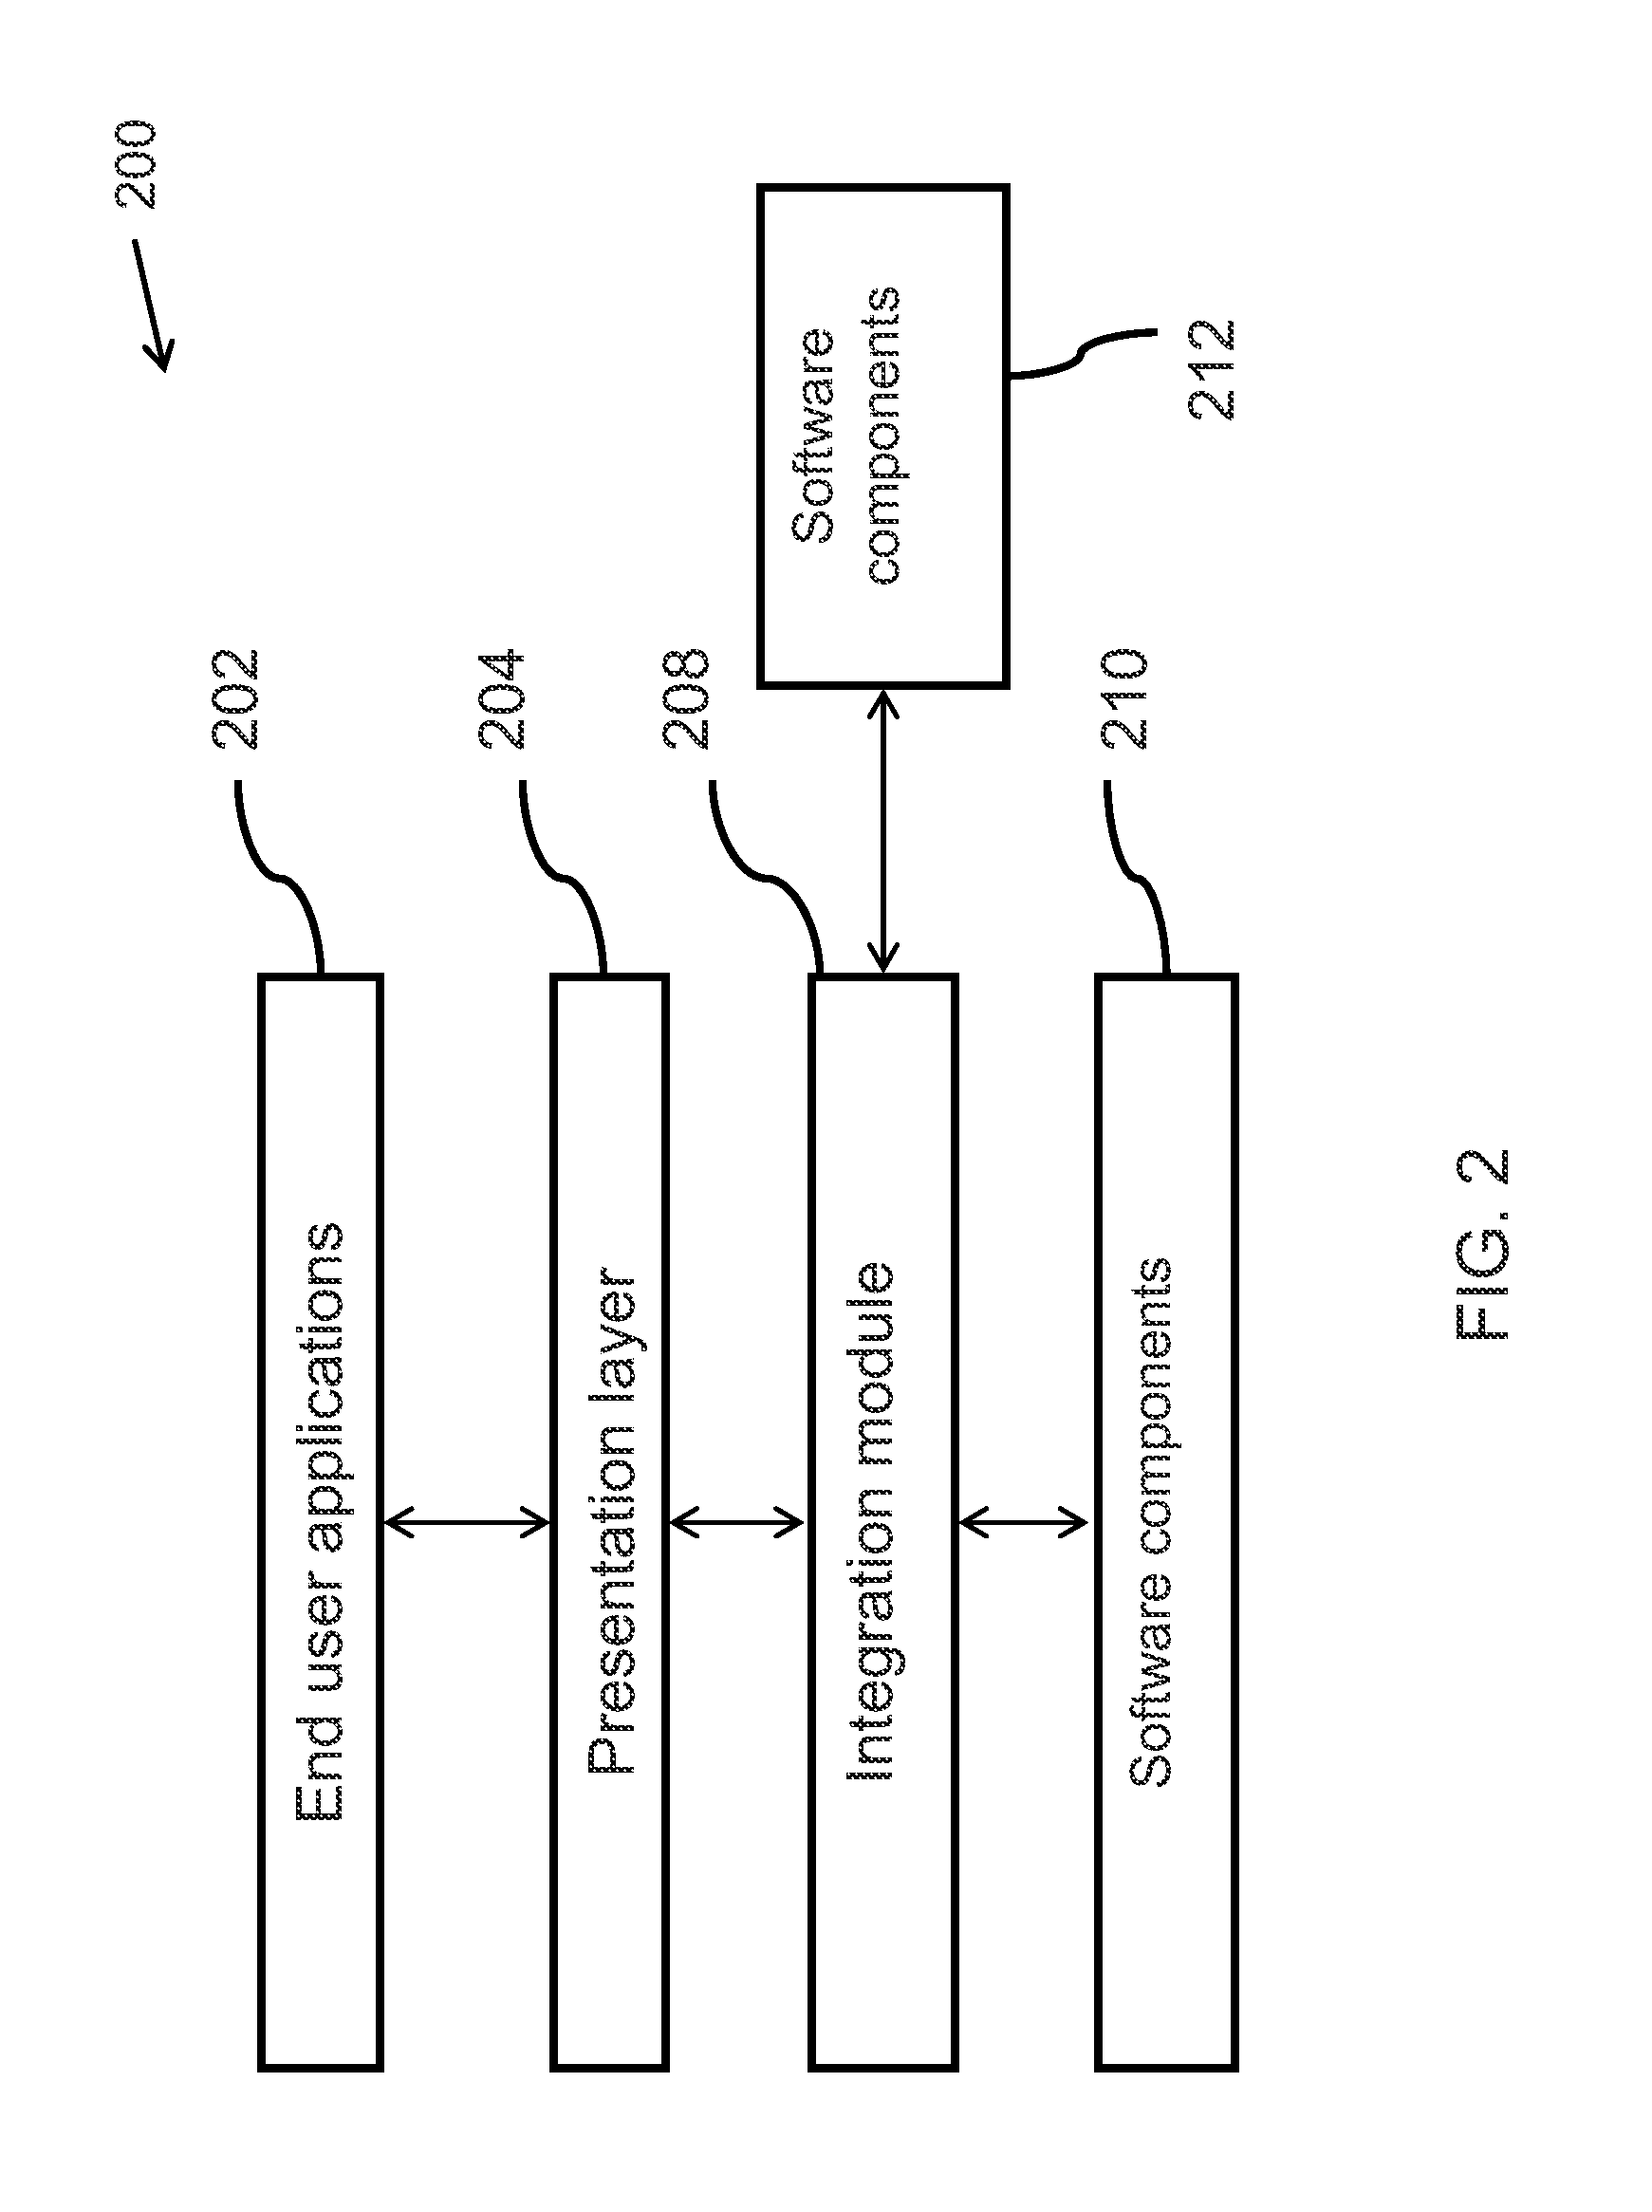 System and method for system integration